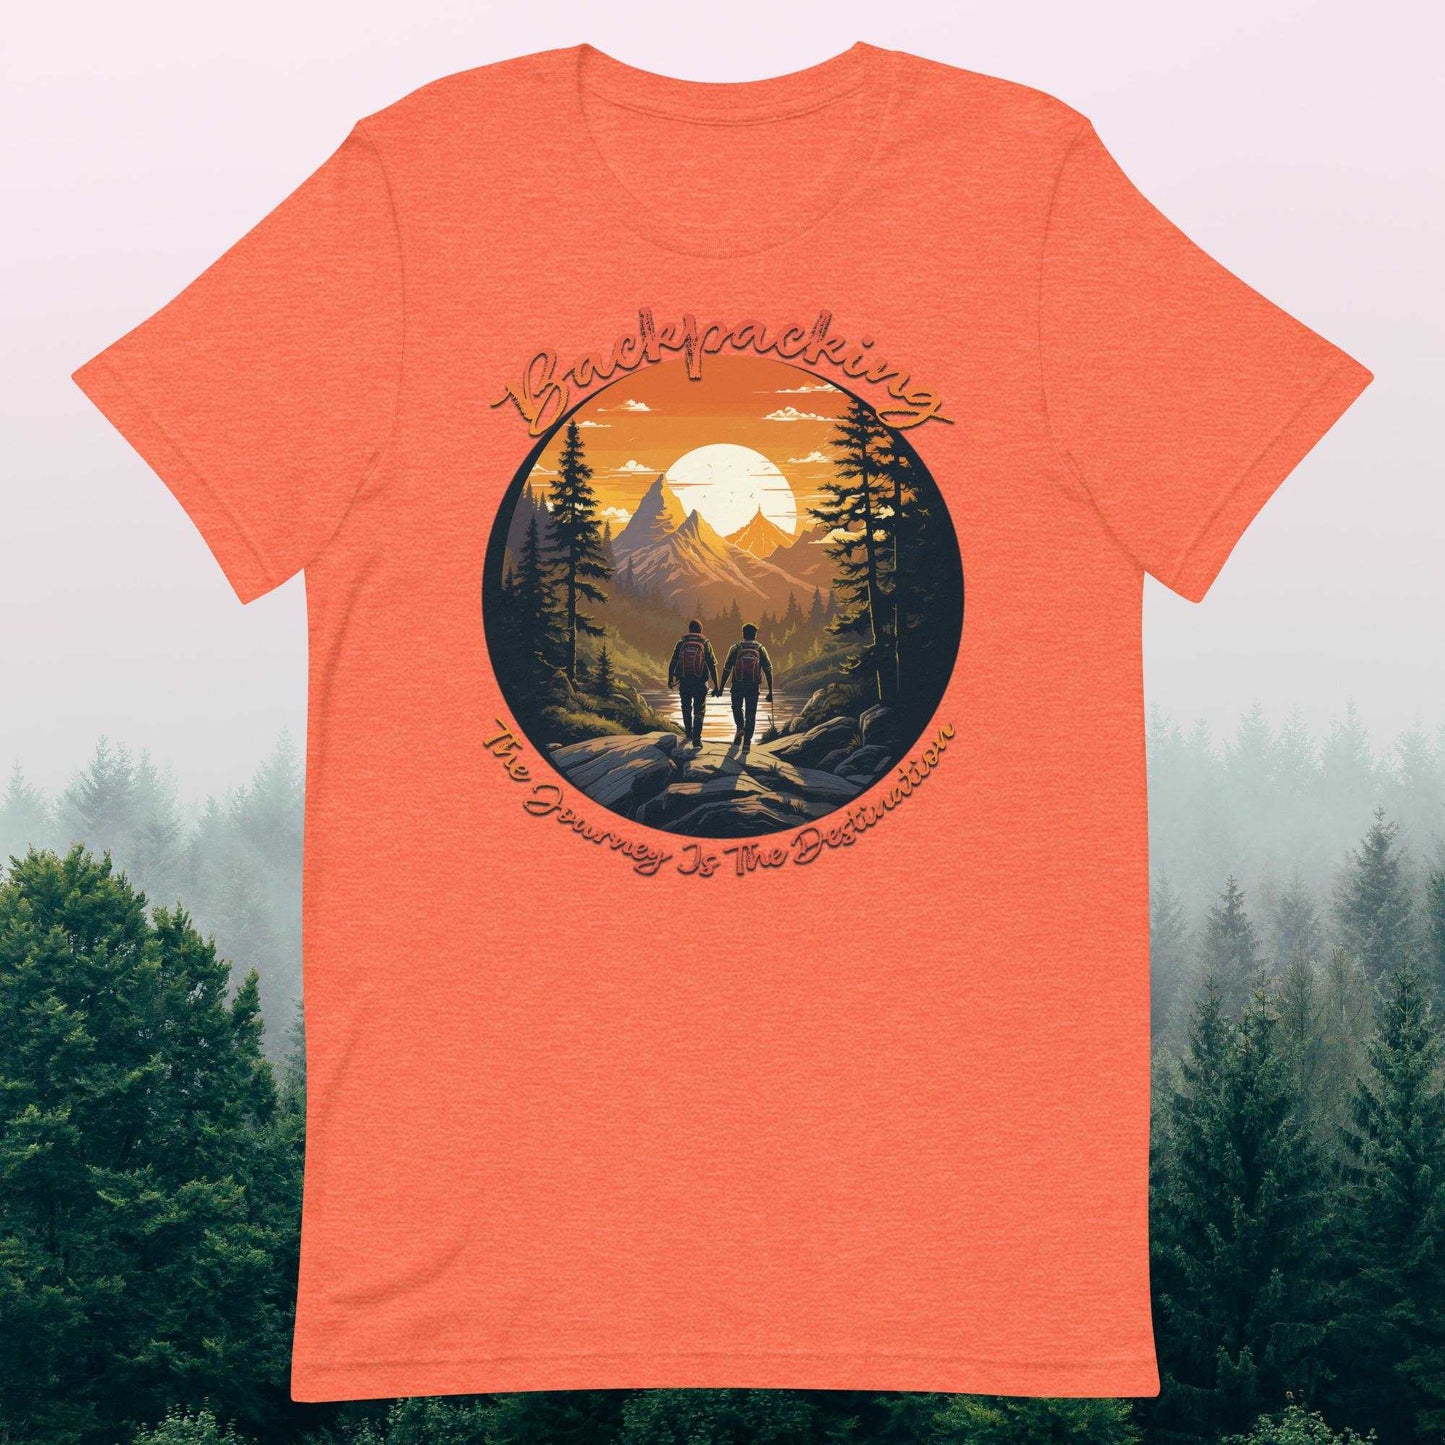 Backpacking: The Journey Is The Destination - The Dude Abides - T-shirt - Backpacking essentials - Camping gear